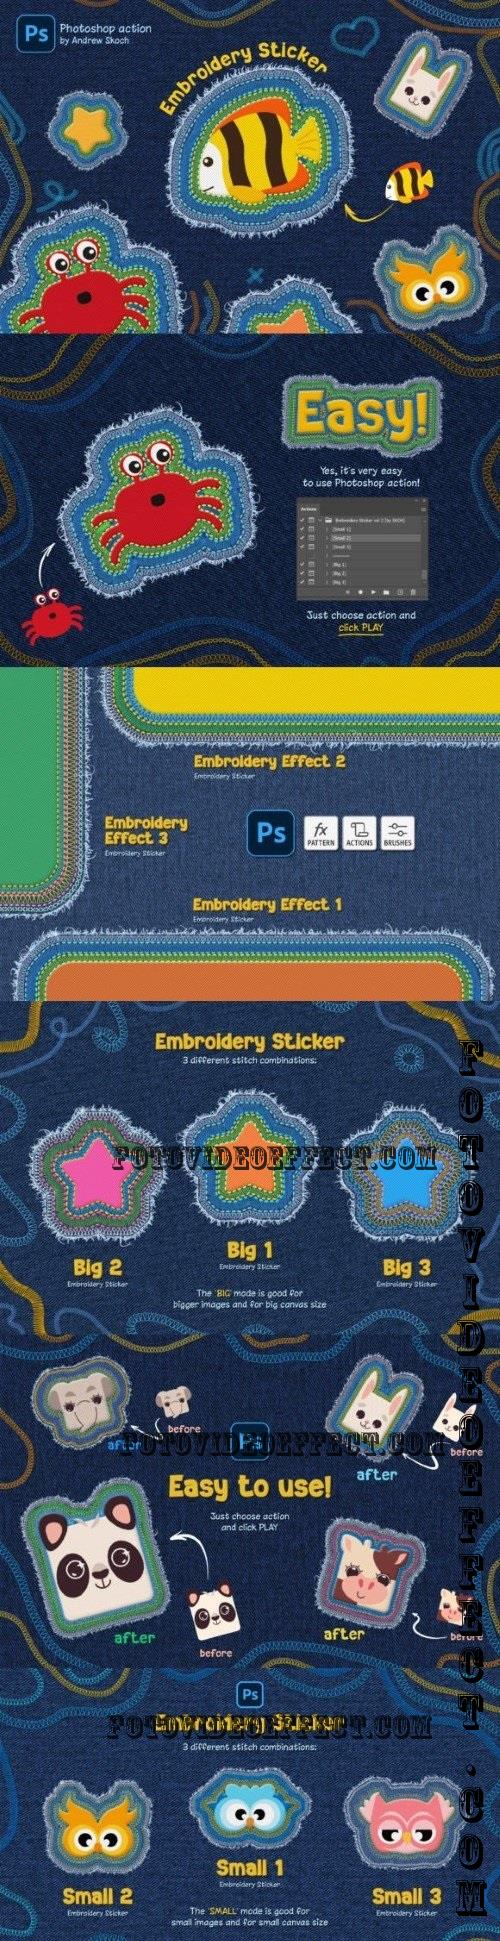 Embroidery Sticker Photoshop Action - 92526074